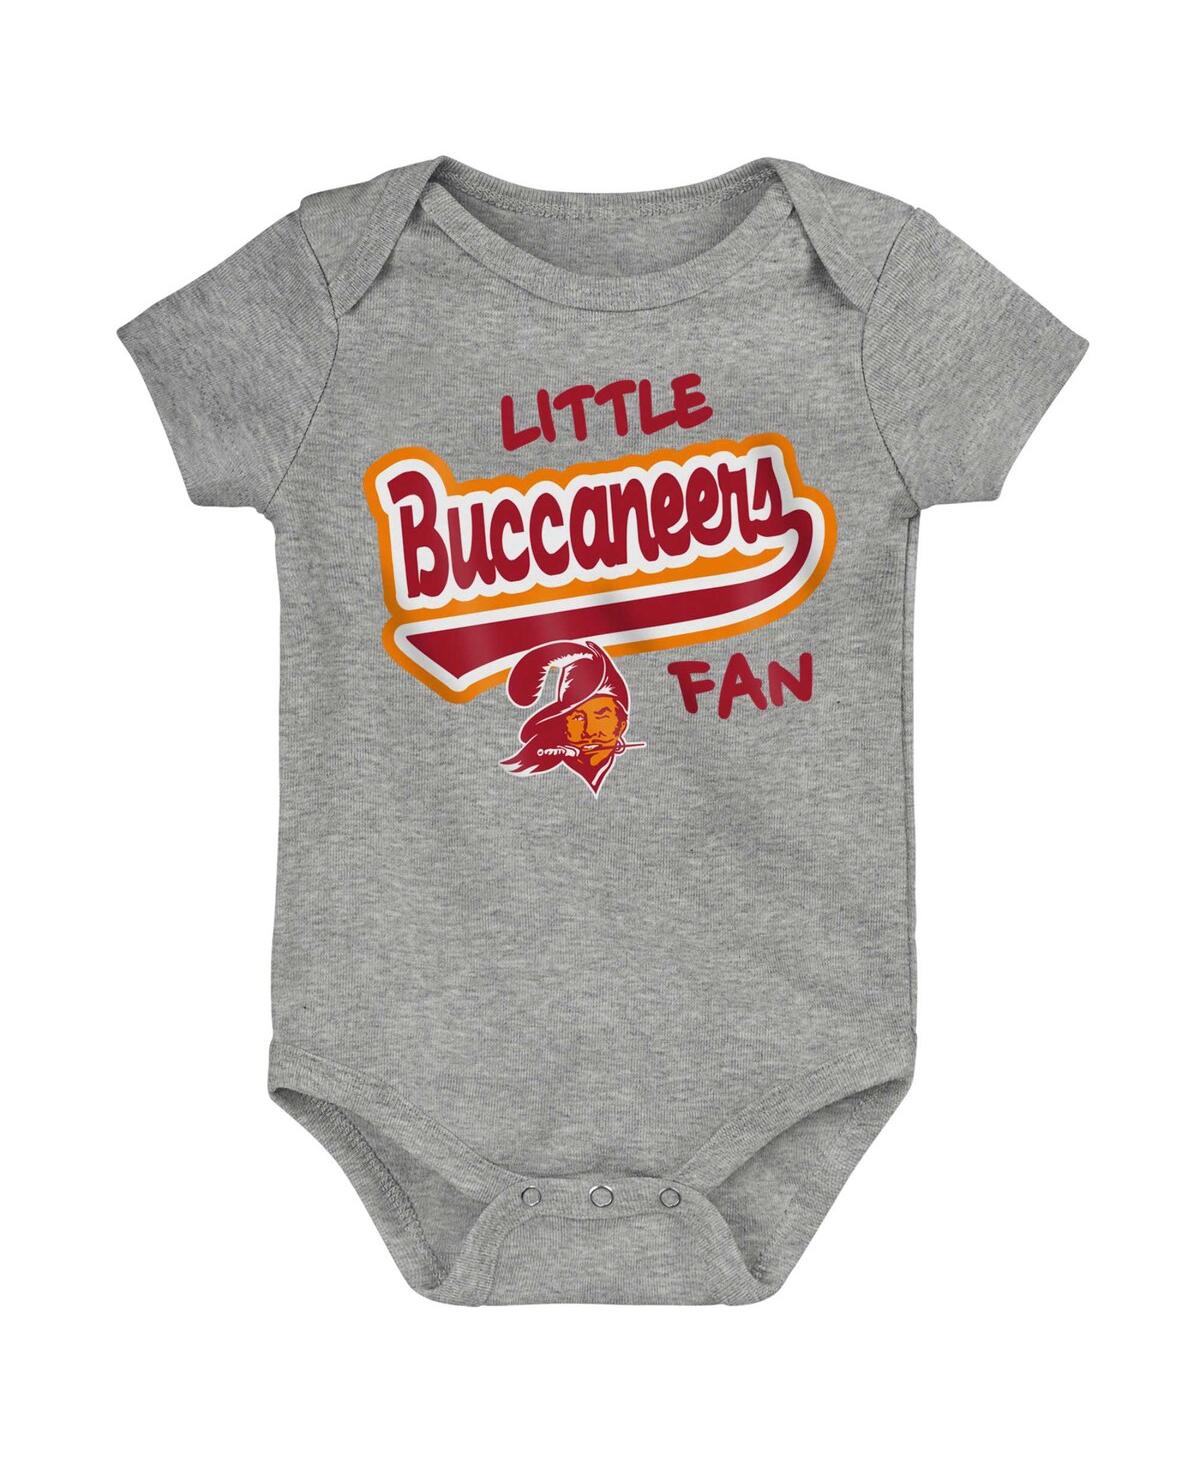 Outerstuff Baby Boys And Girls Heather Gray Distressed Tampa Bay Buccaneers Retro Little Baller Bodysuit